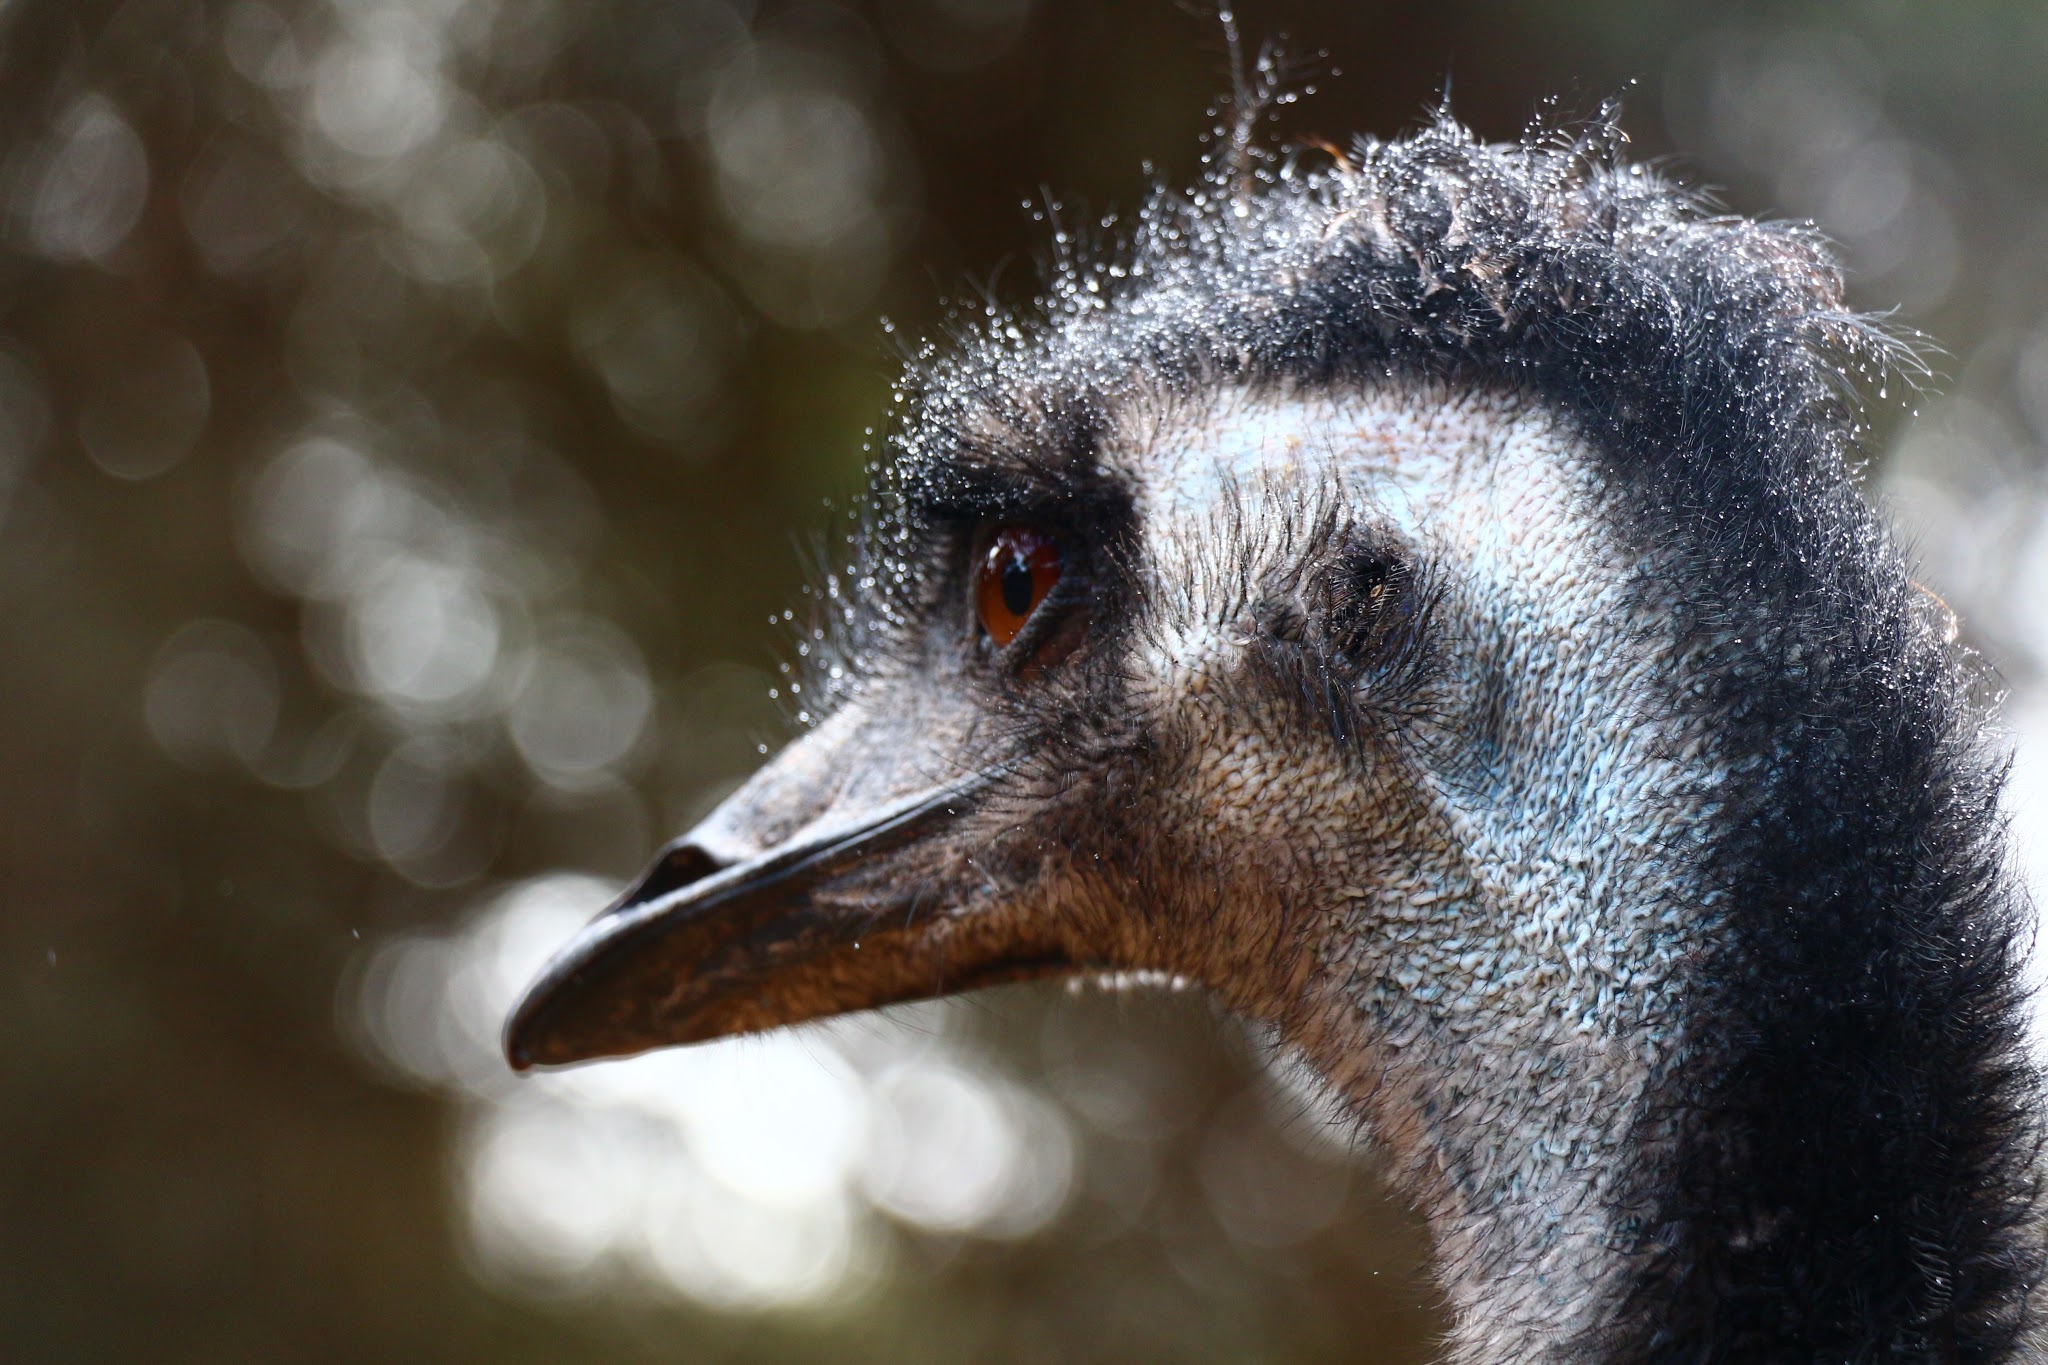 Glamorous headshot of an emu with a blurry background. It has a bluish neck and almost mohawk-like black hair bristles going from its head down its neck. It has a gorgeous red eye with which it's gazing into the distance.
